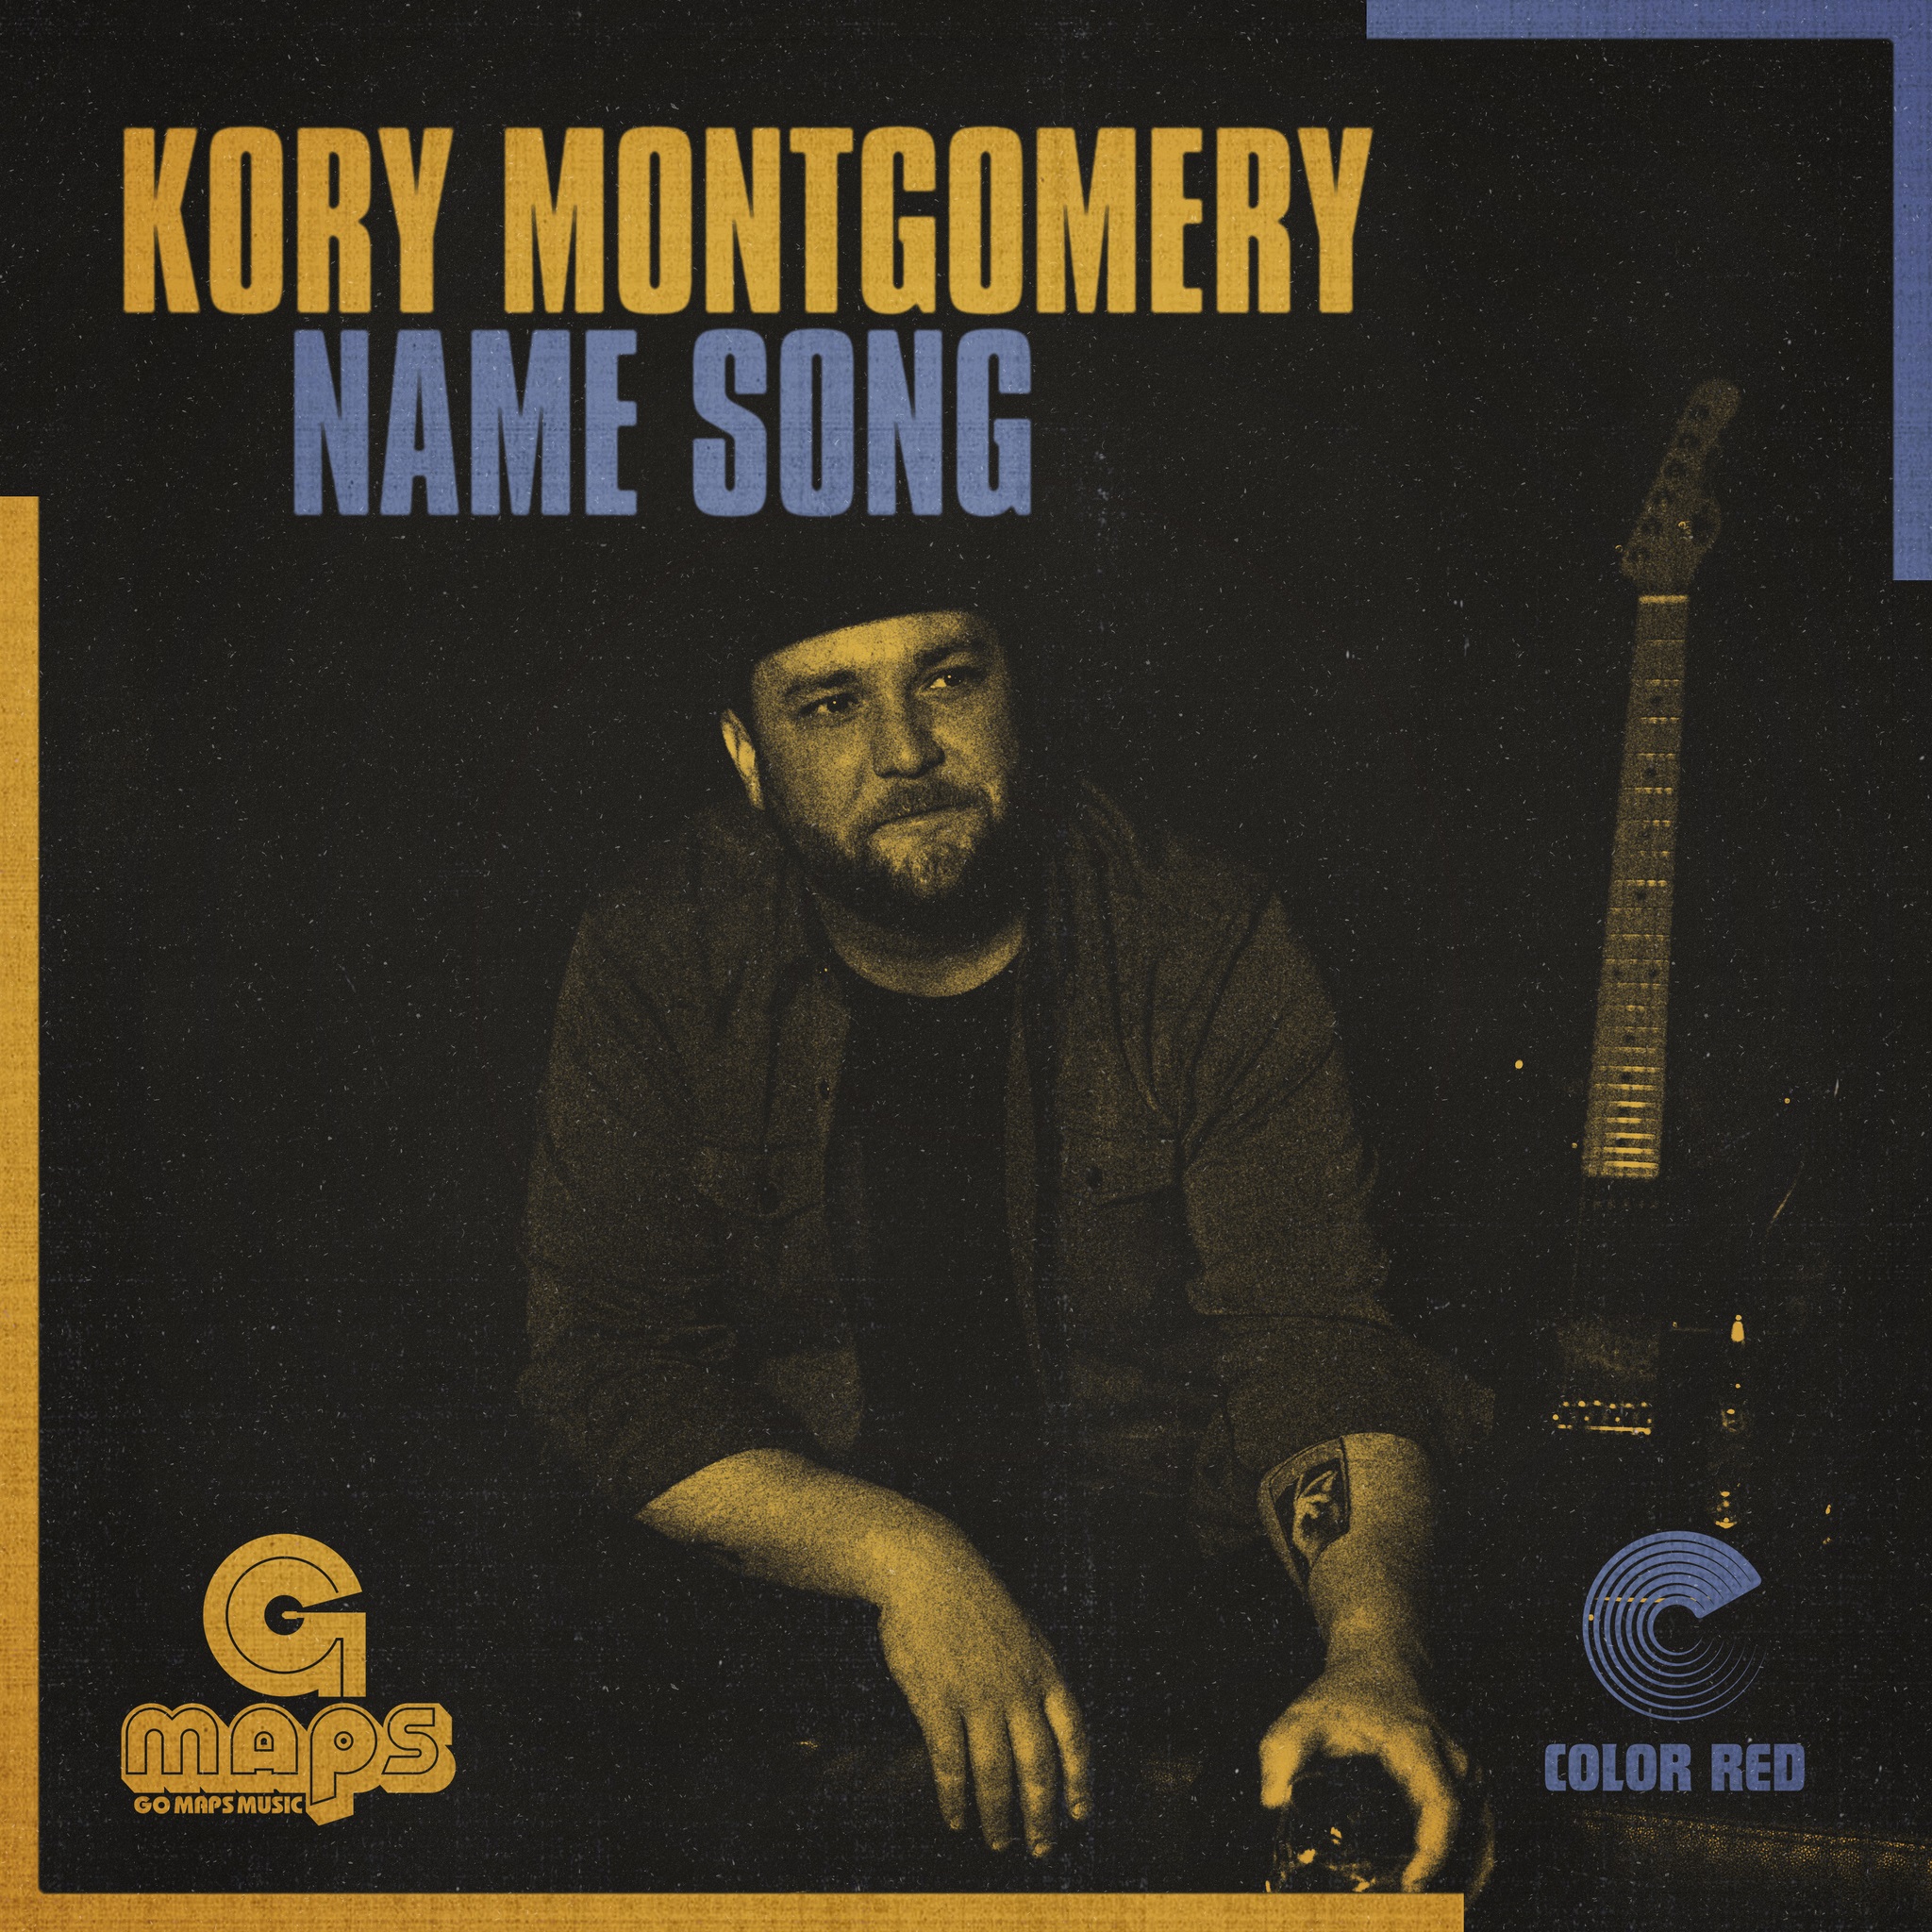 "Name Song" by Kory Montgomery